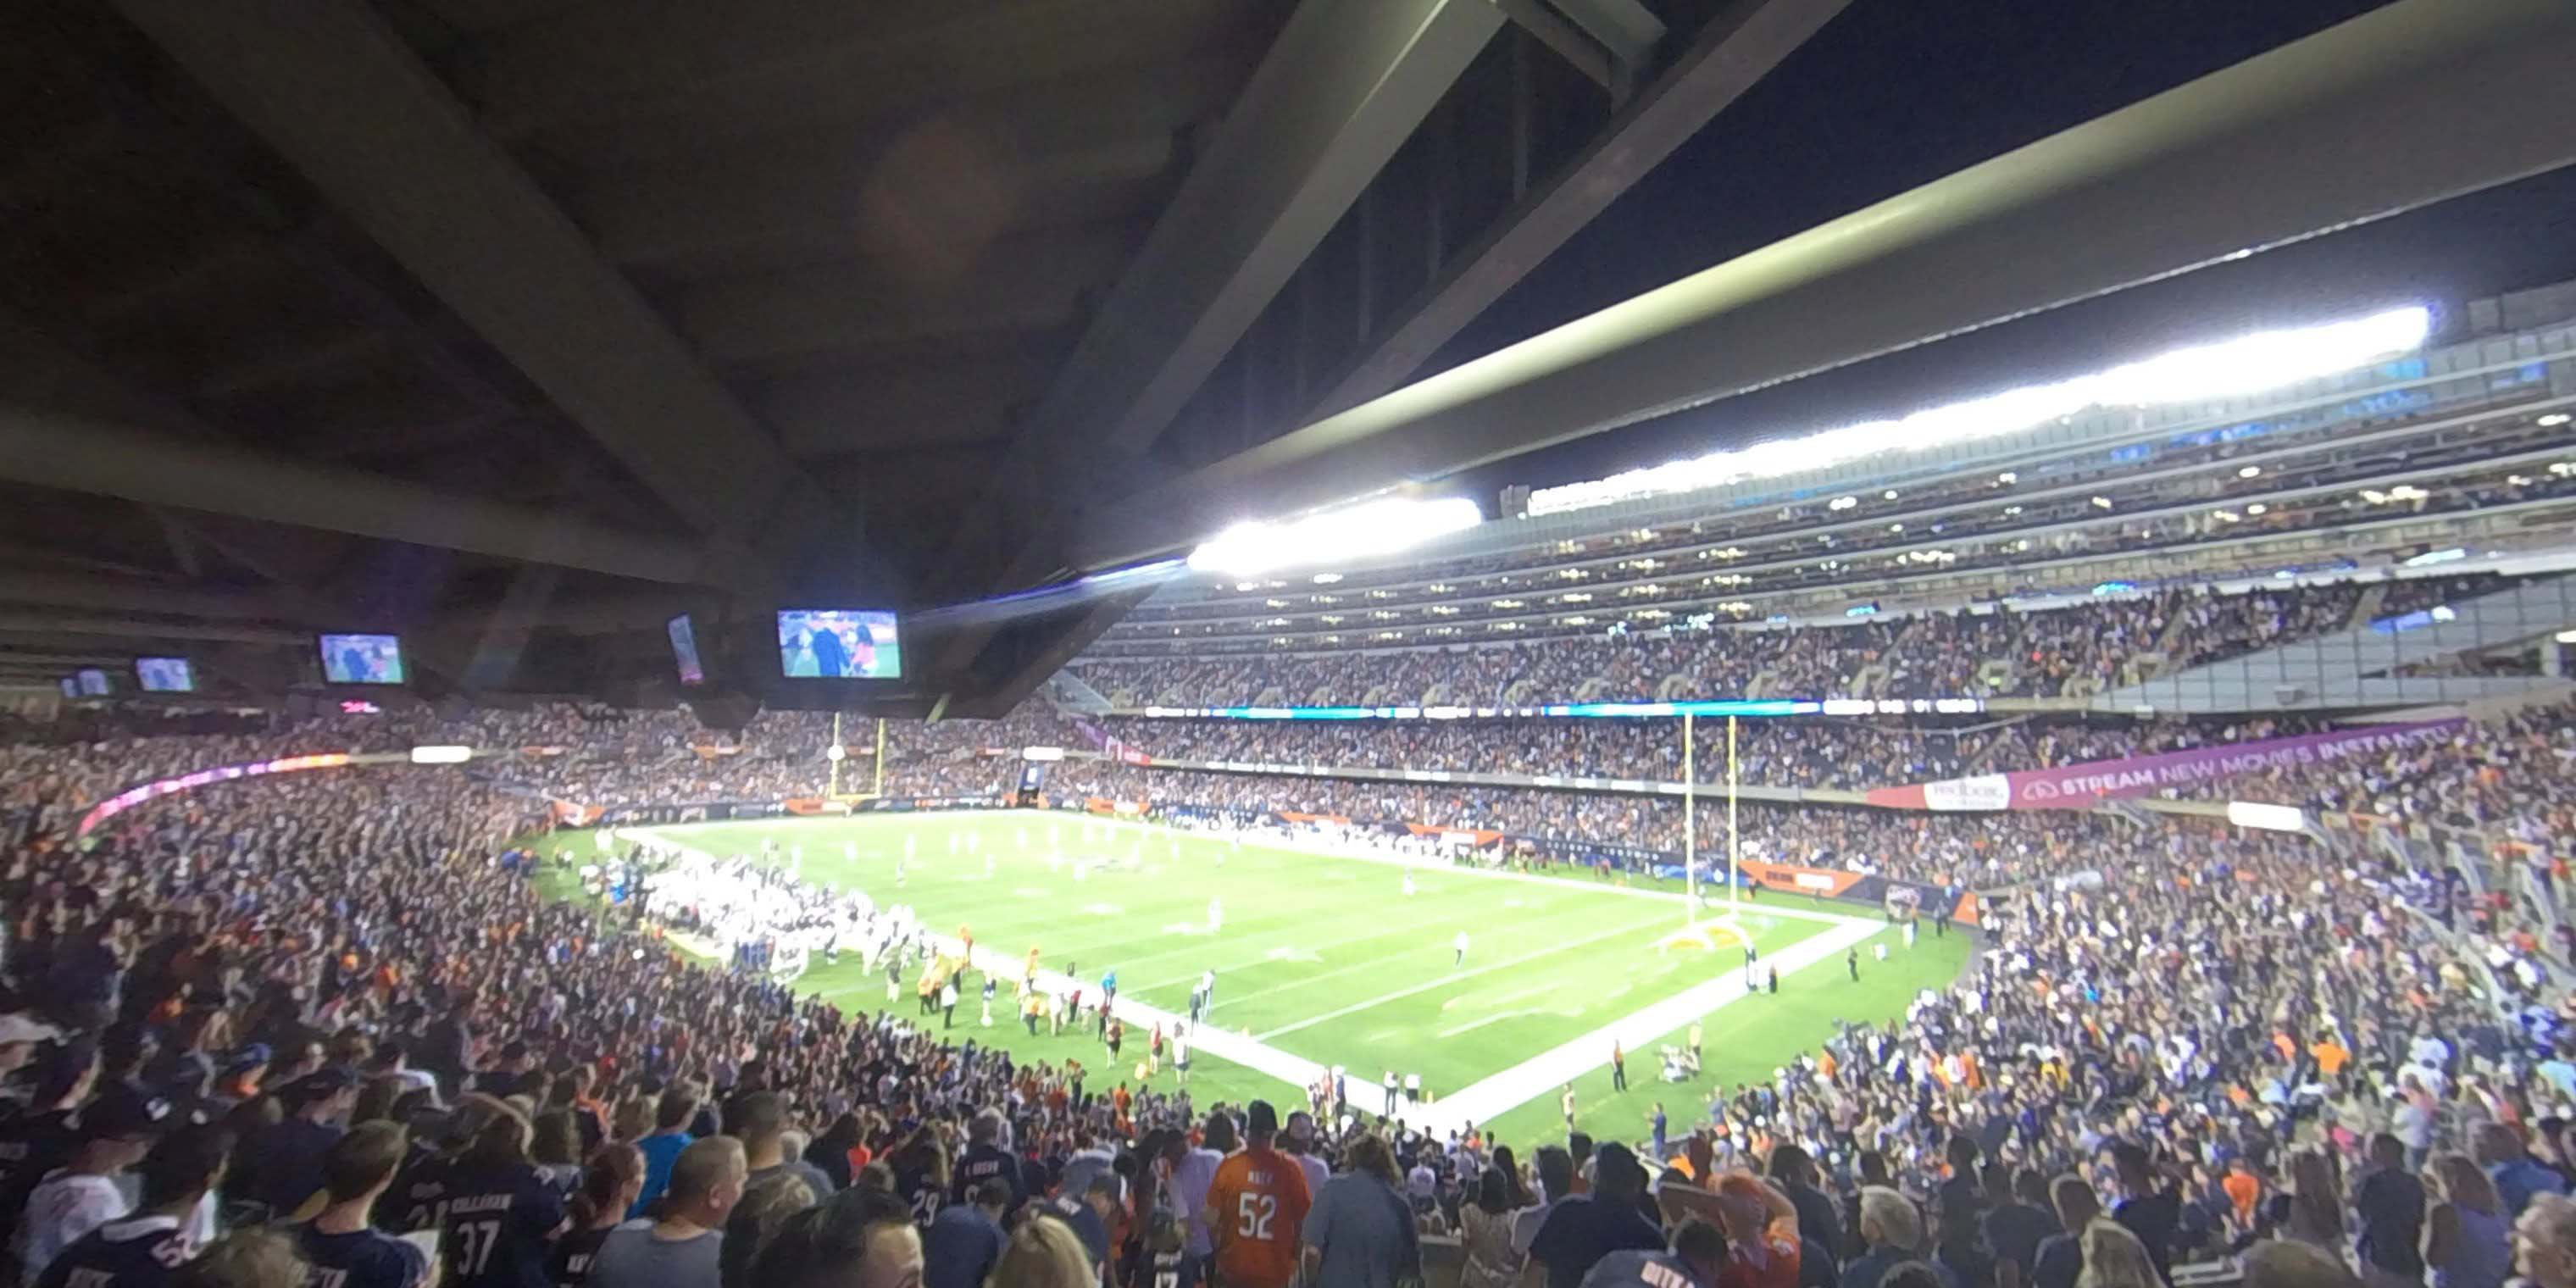 section 228 panoramic seat view  for football - soldier field